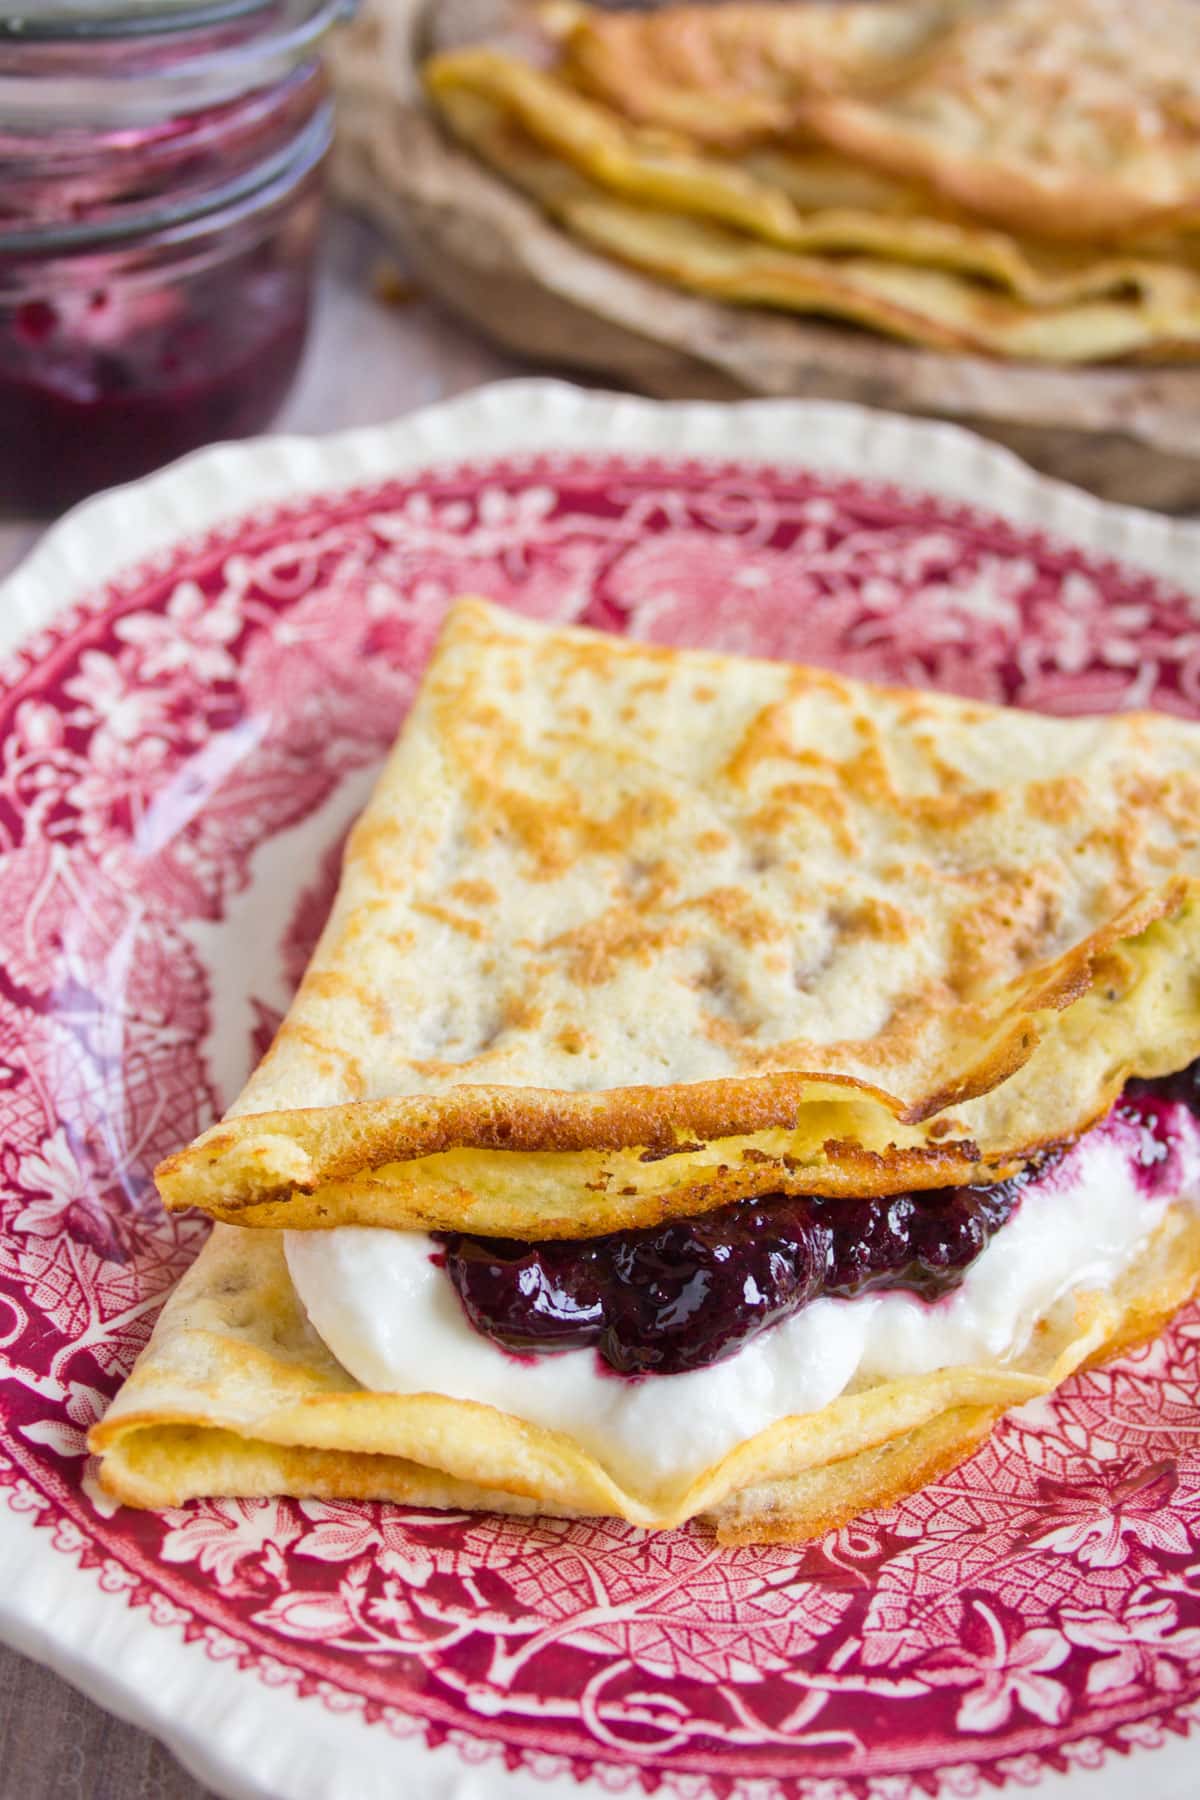 Folded crepe on a plate filled with yogurt and jam.